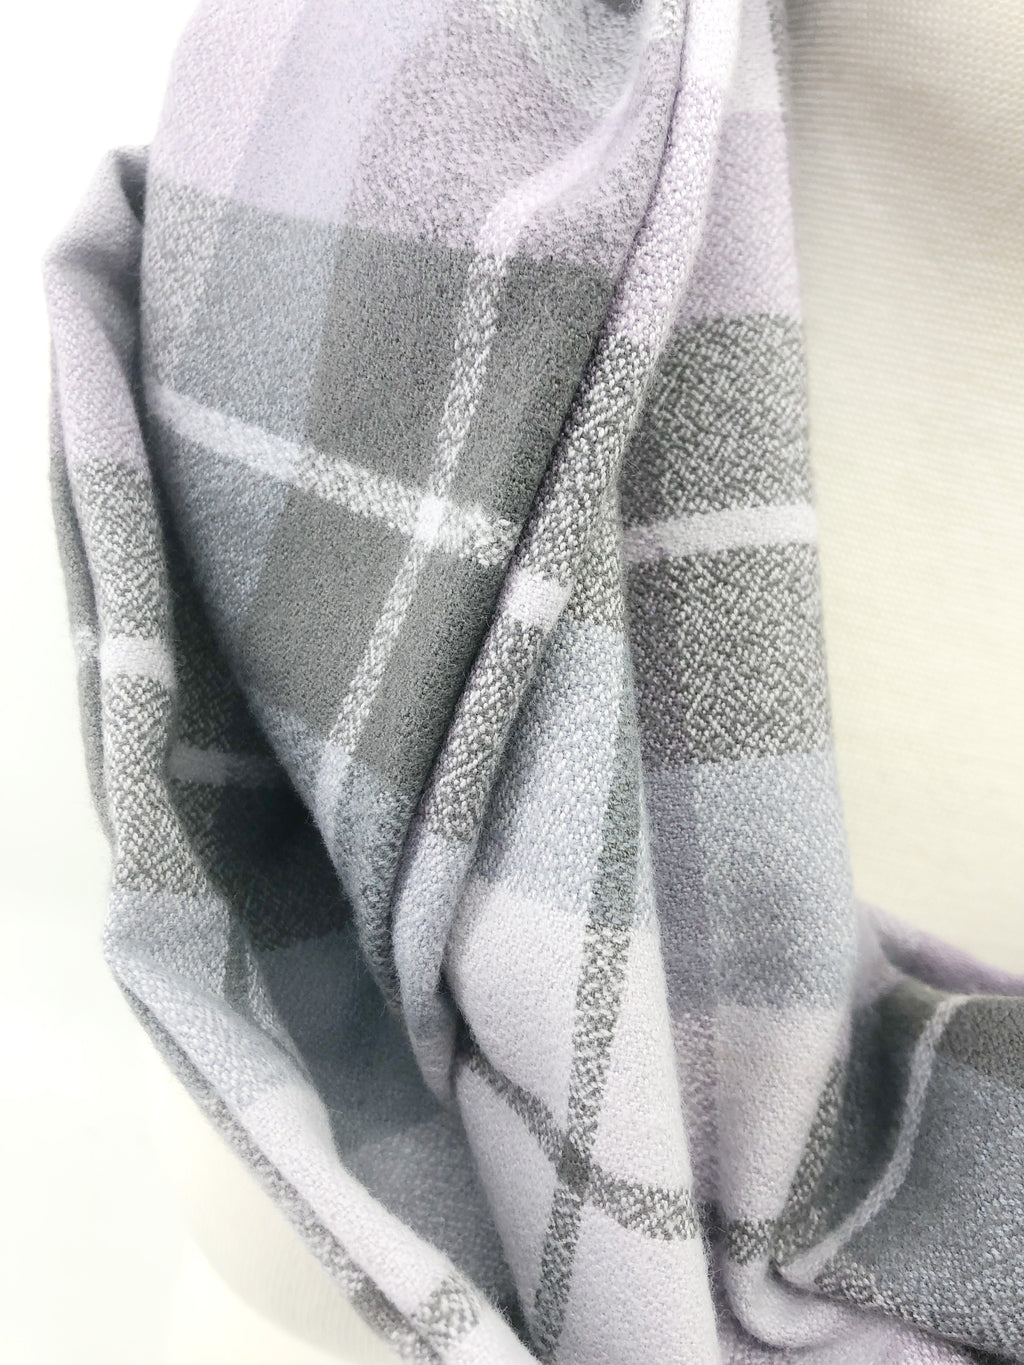 Lavender Plaid Eternity Scarf with a Leather Cuff